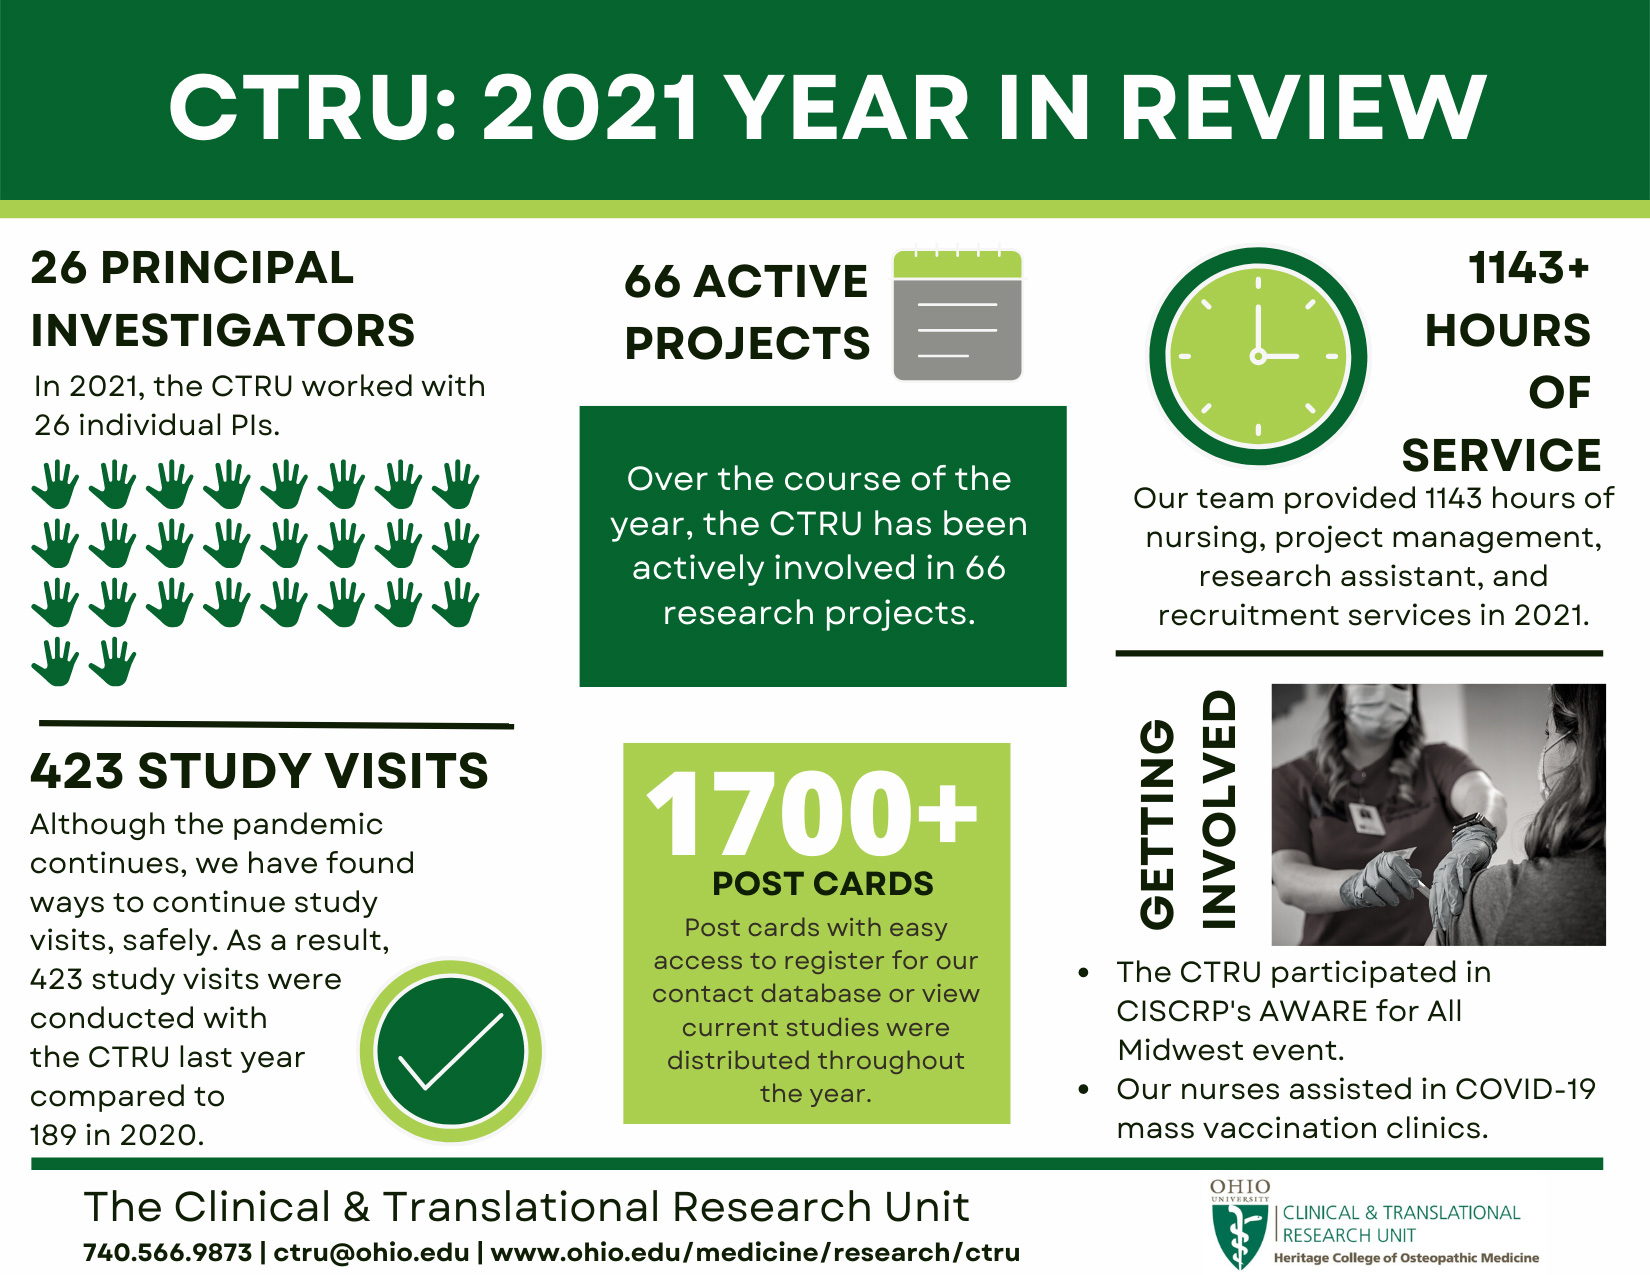 CTRU 2021 Year in Review